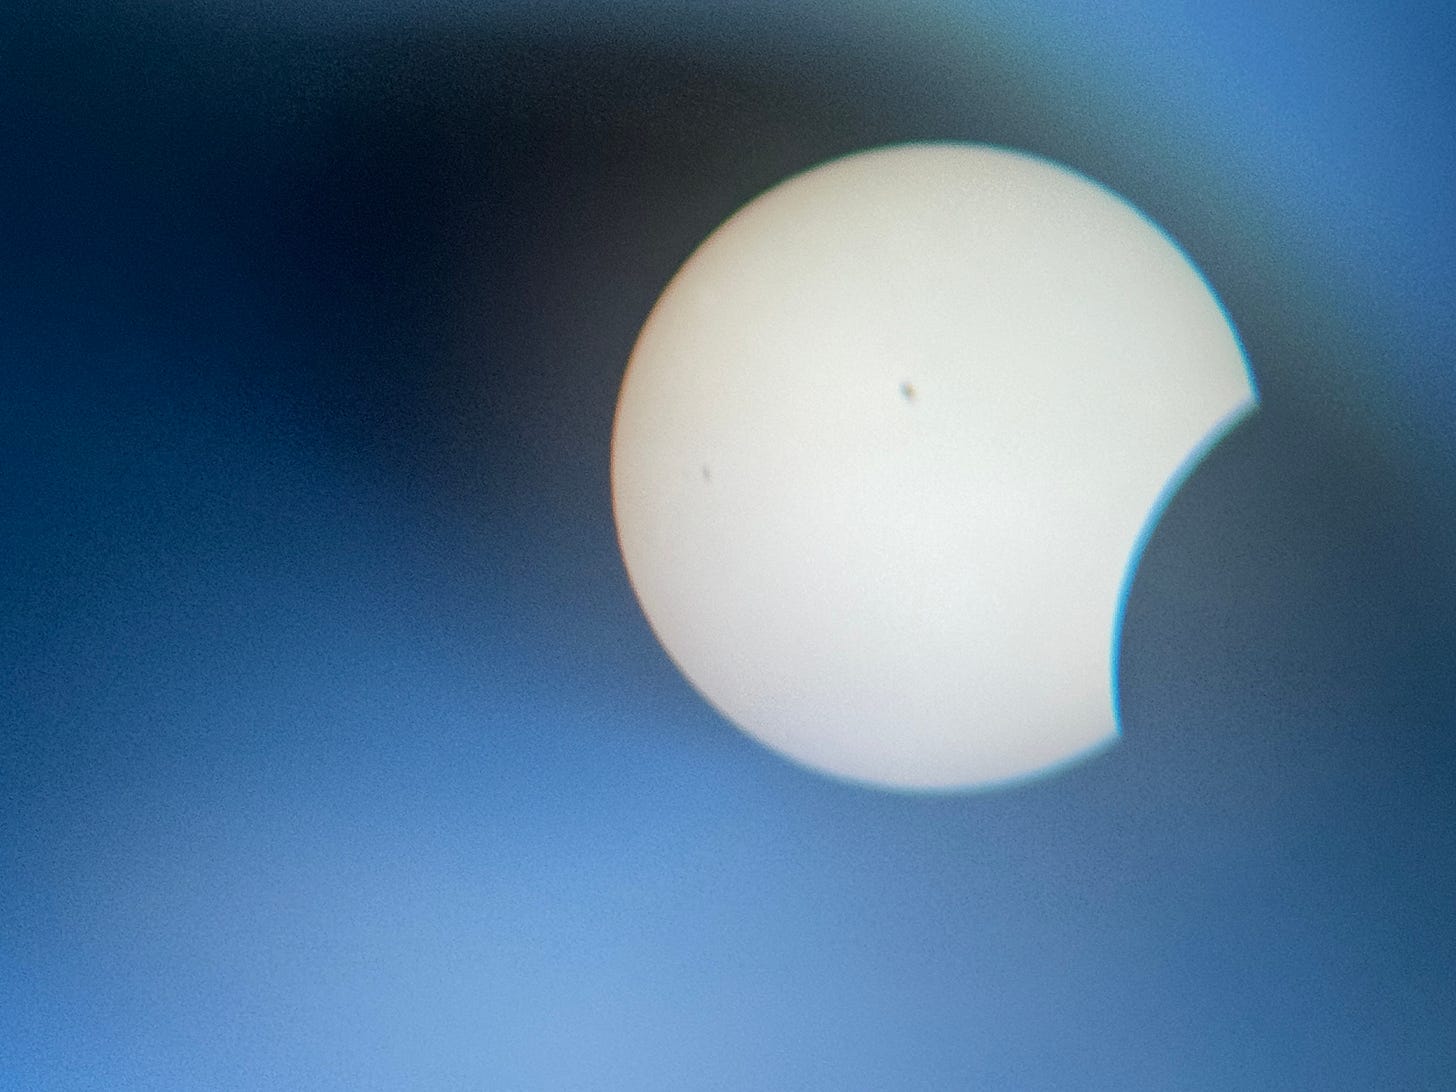 ArmaniXR’s photo of the Sun through solar binoculars as it is beginning to be occluded by the Moon